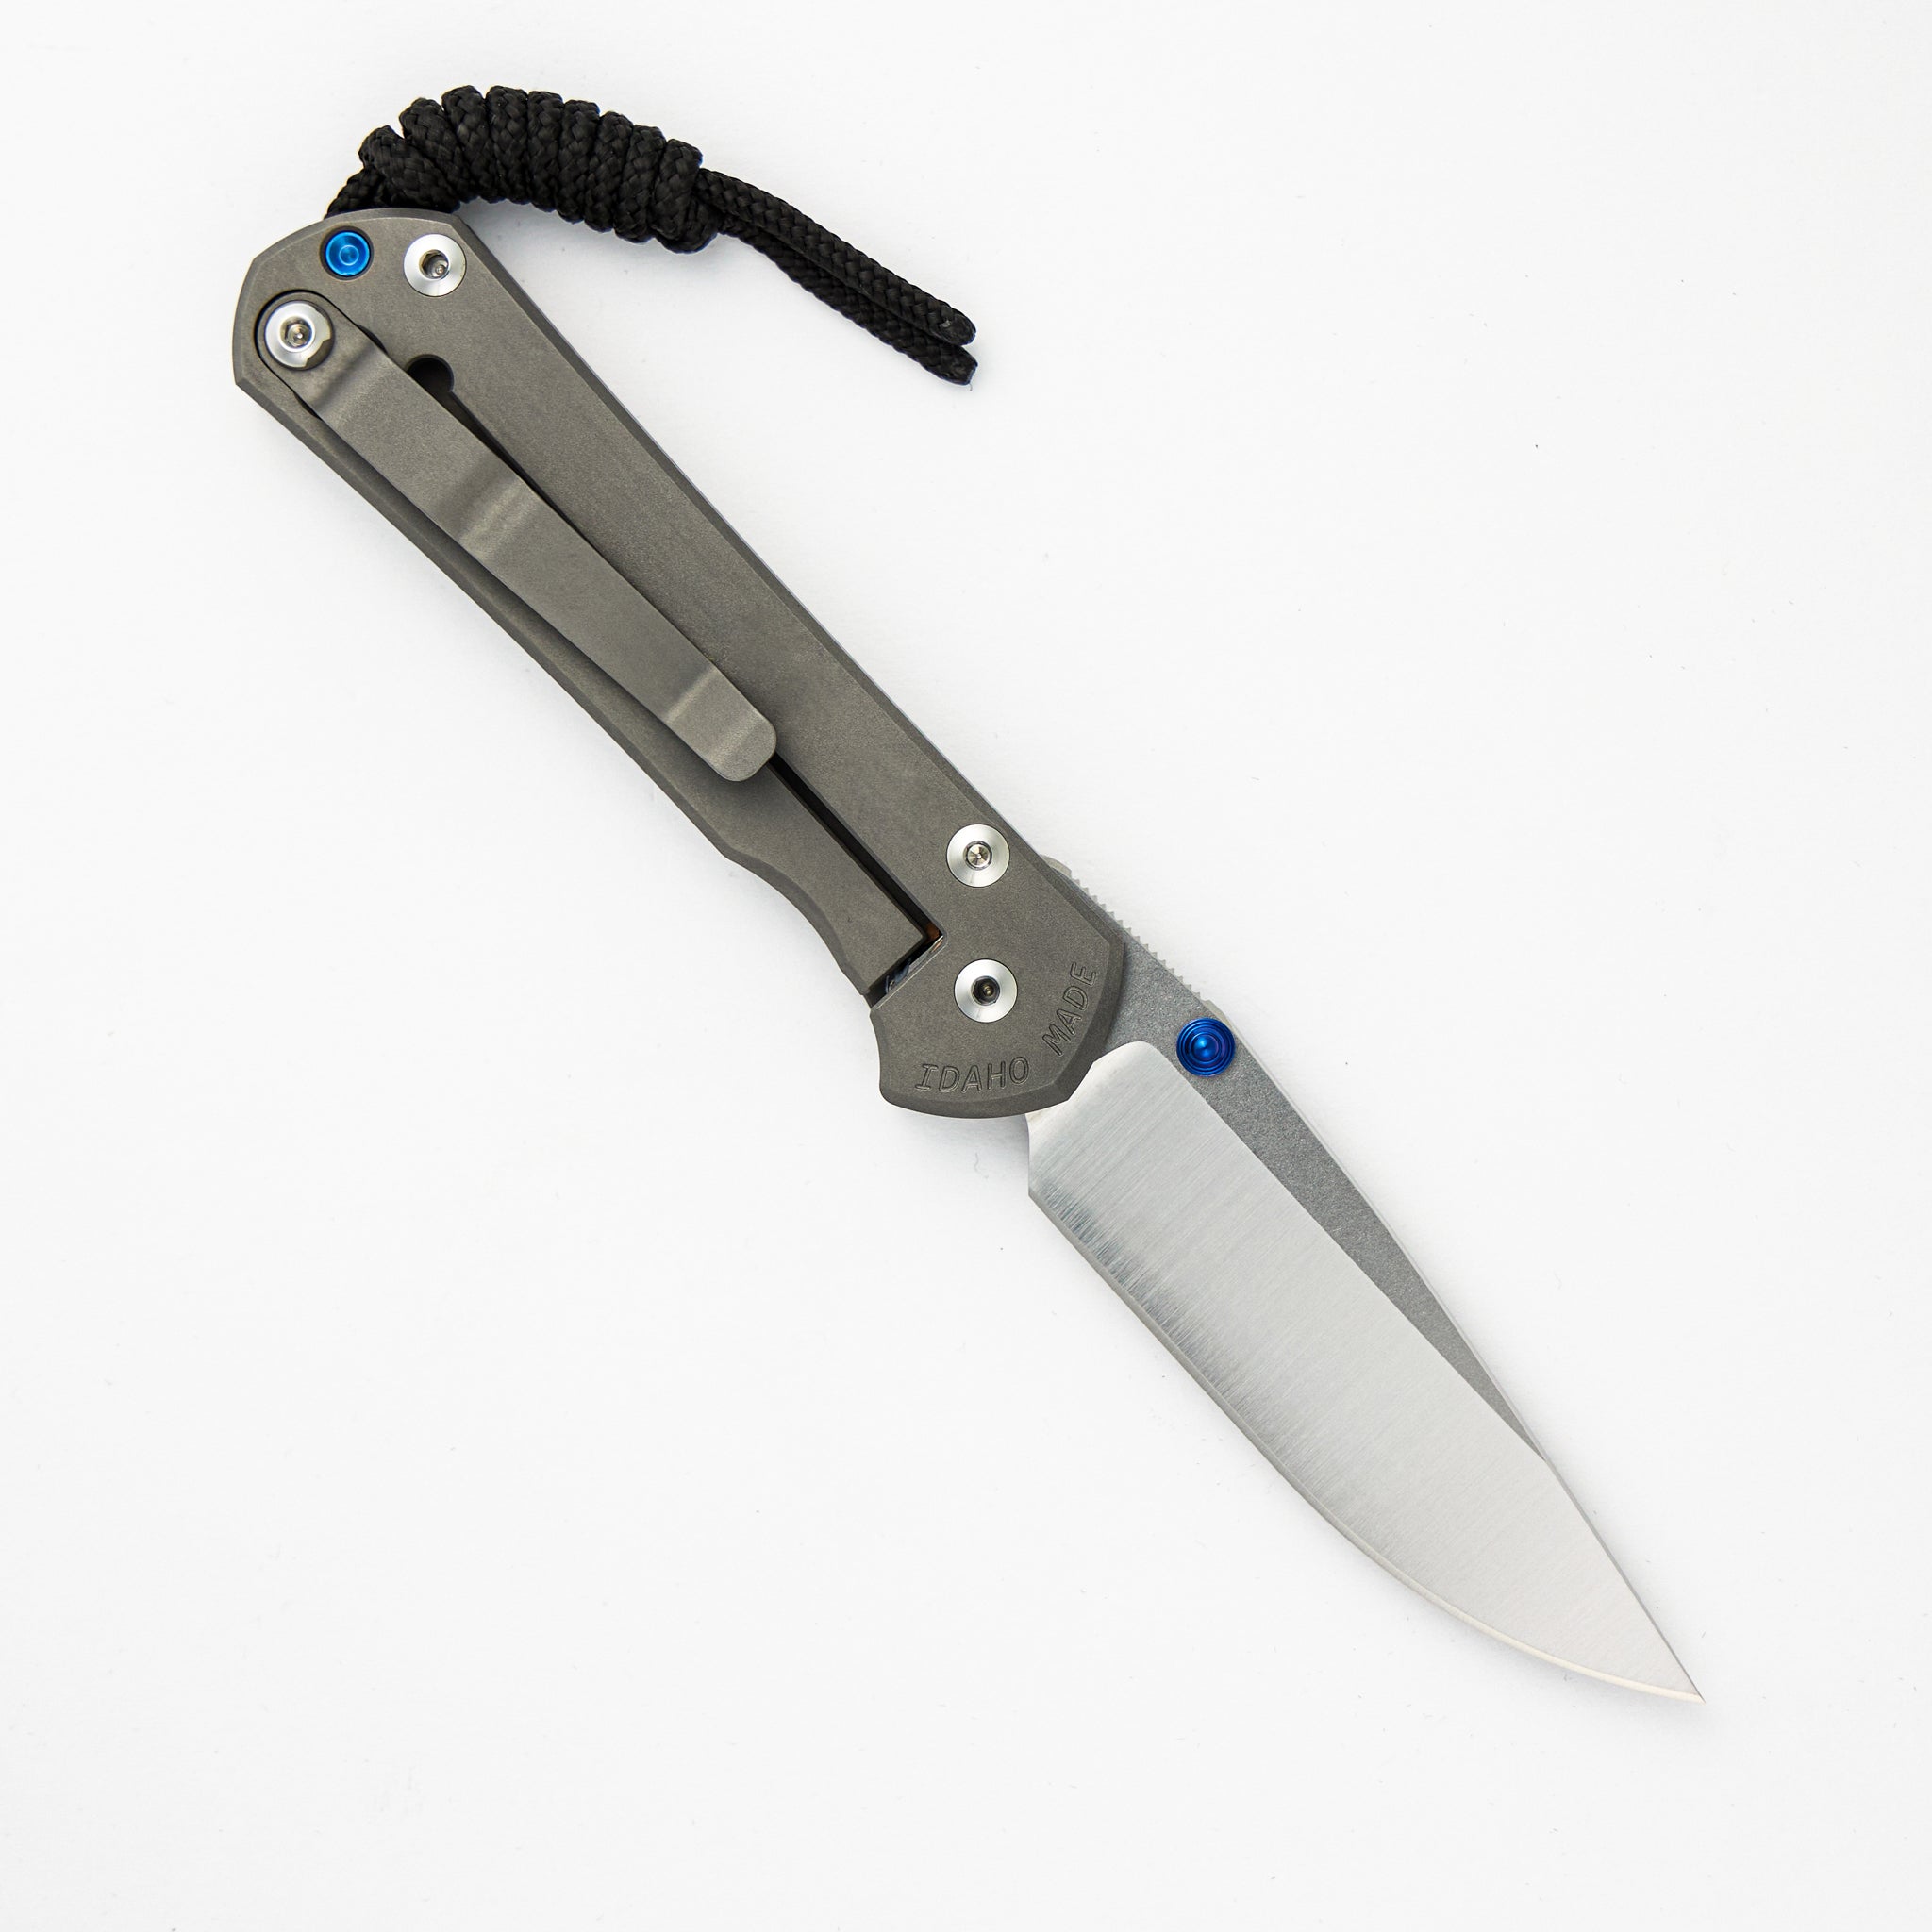 Chris Reeve Small Sebenza 31 - Polished Drop Point CPM MagnaCut Blade - Glass Blasted - Blue Double Thumb Lugs